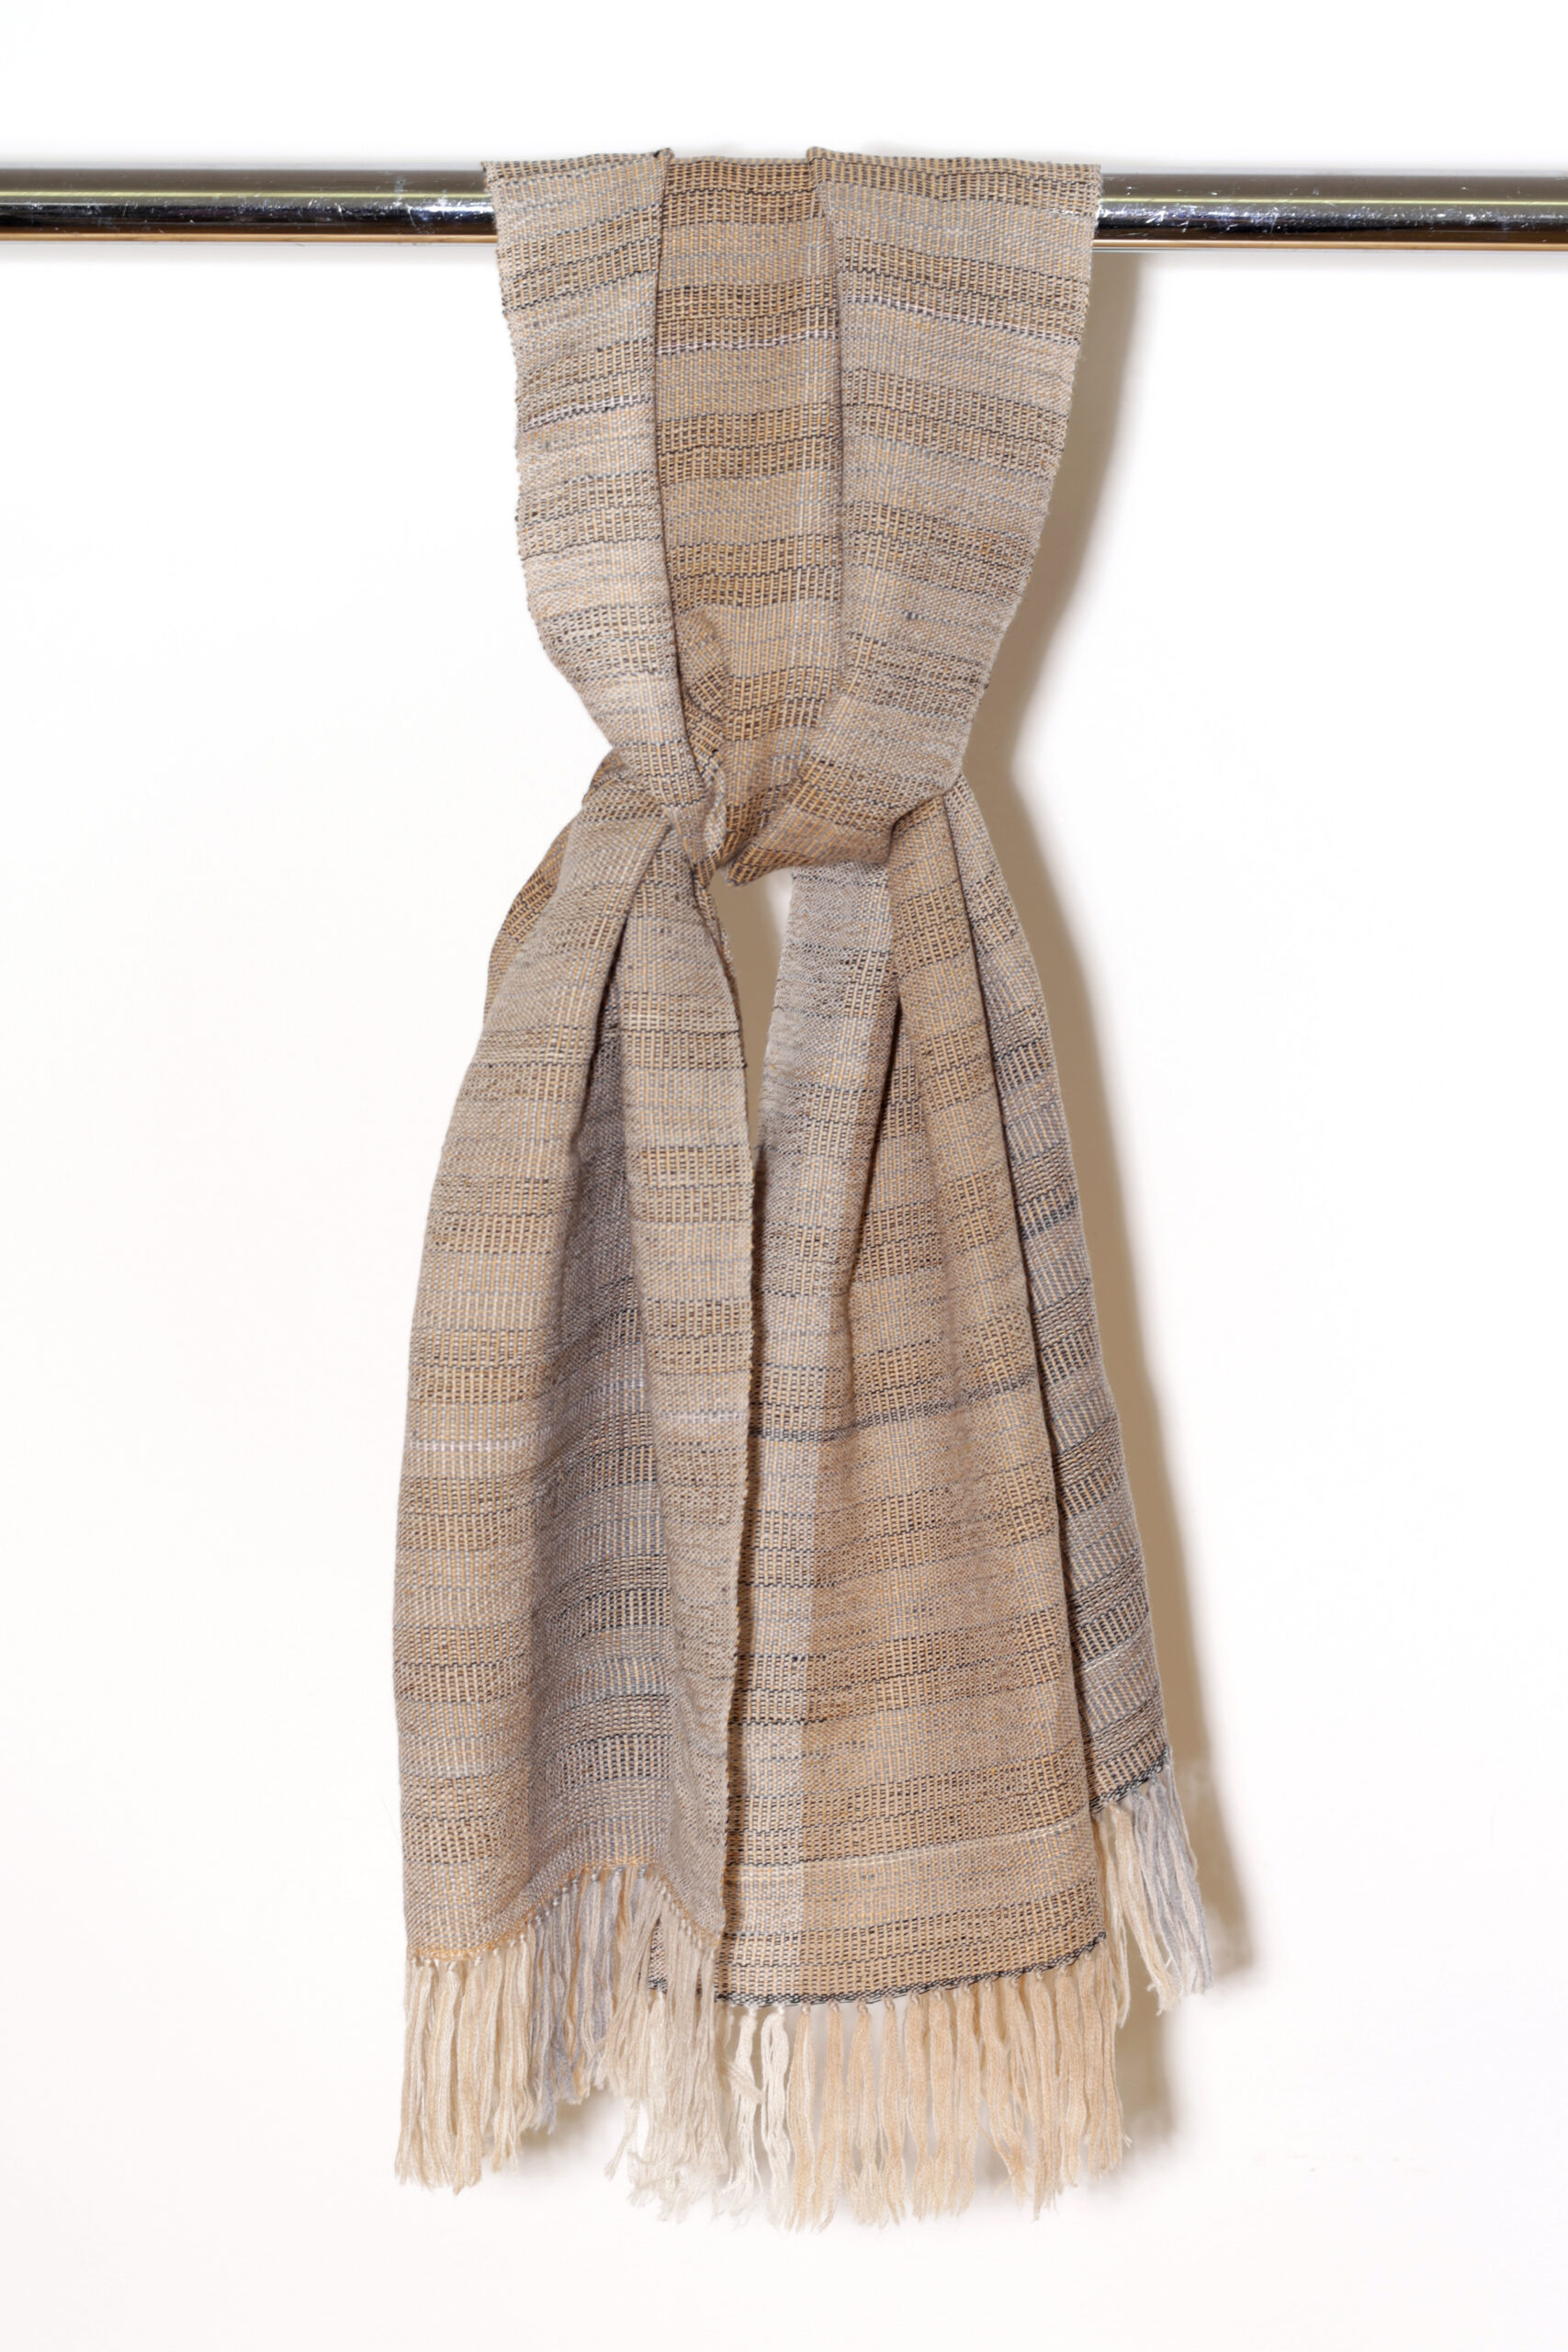 handwoven plaid, wool and linen combination